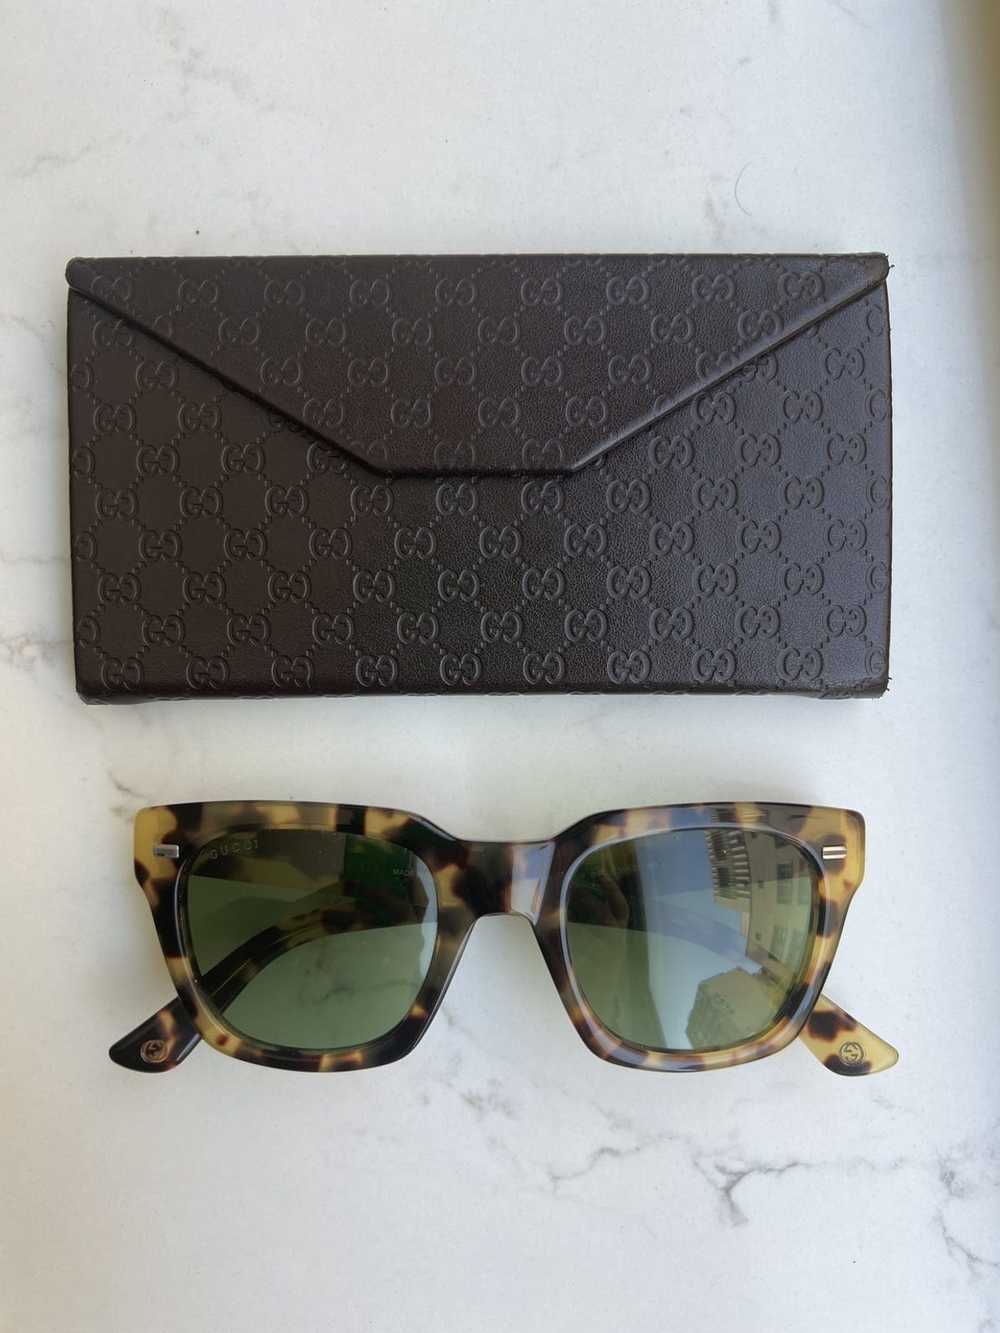 Gucci Limited edition sunglasses by Gucci - image 2